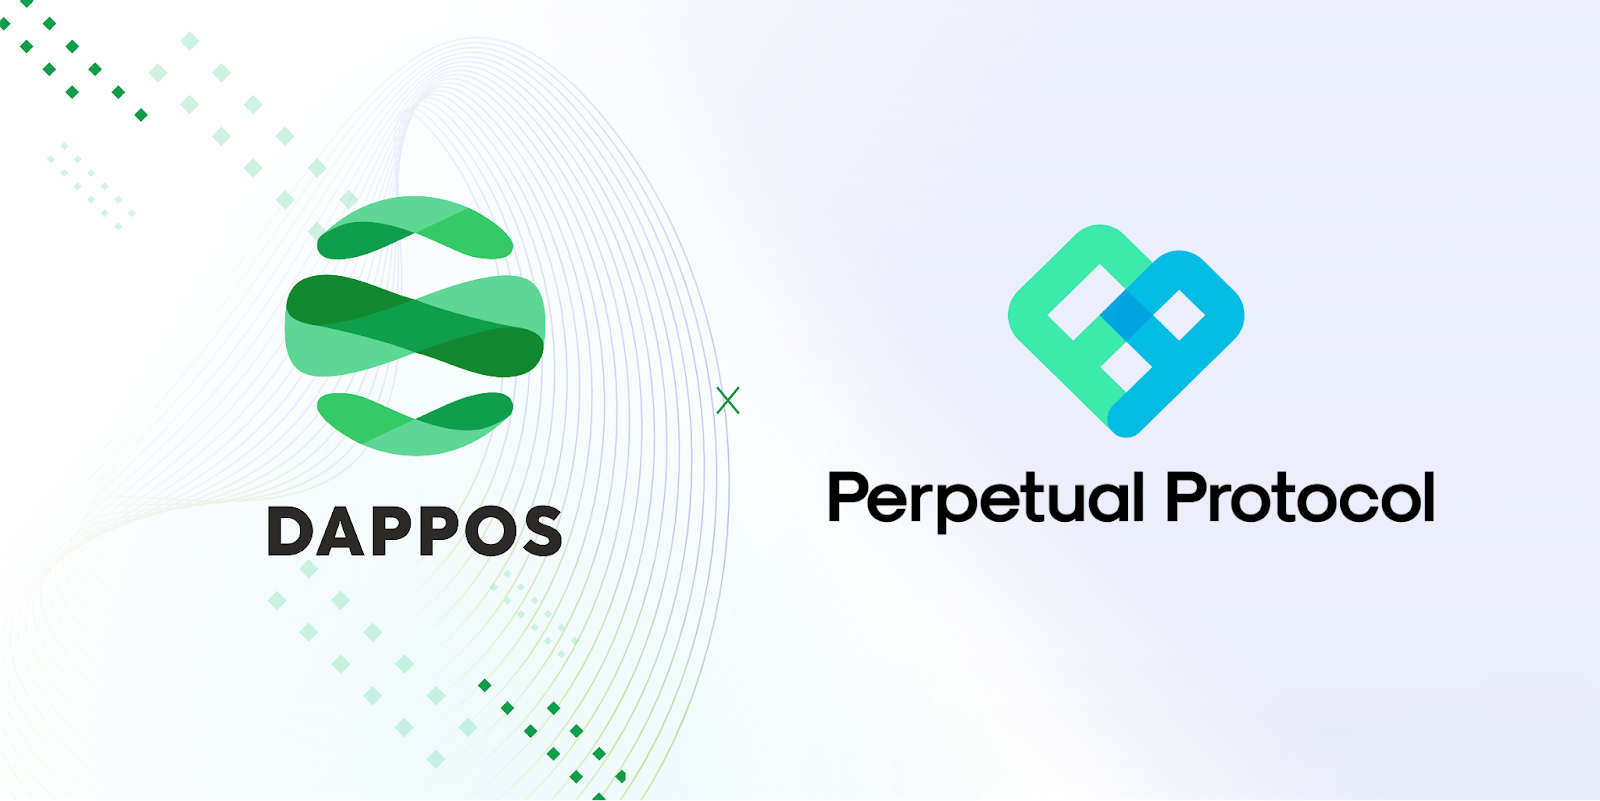 dappOS Integrates Perpetual Protocol Support to Fast-Track DEX and Web3 Usage